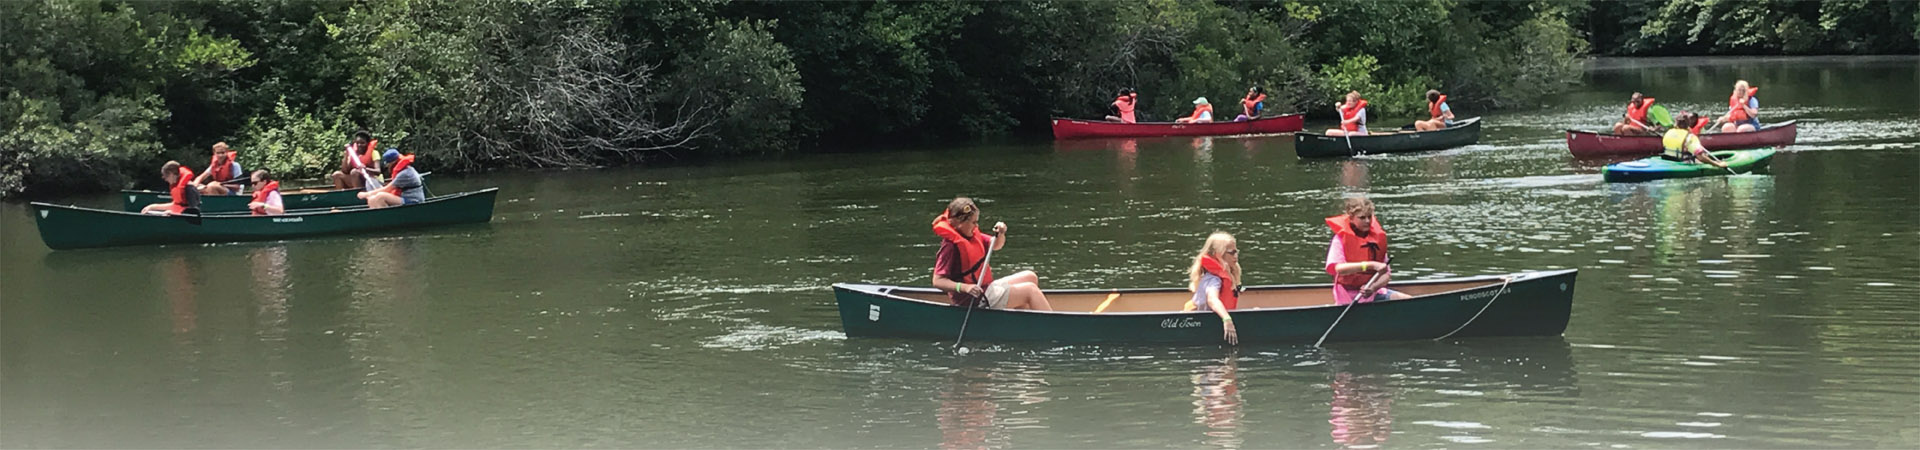  Girl Scouts in canoes at Camp Skimino 